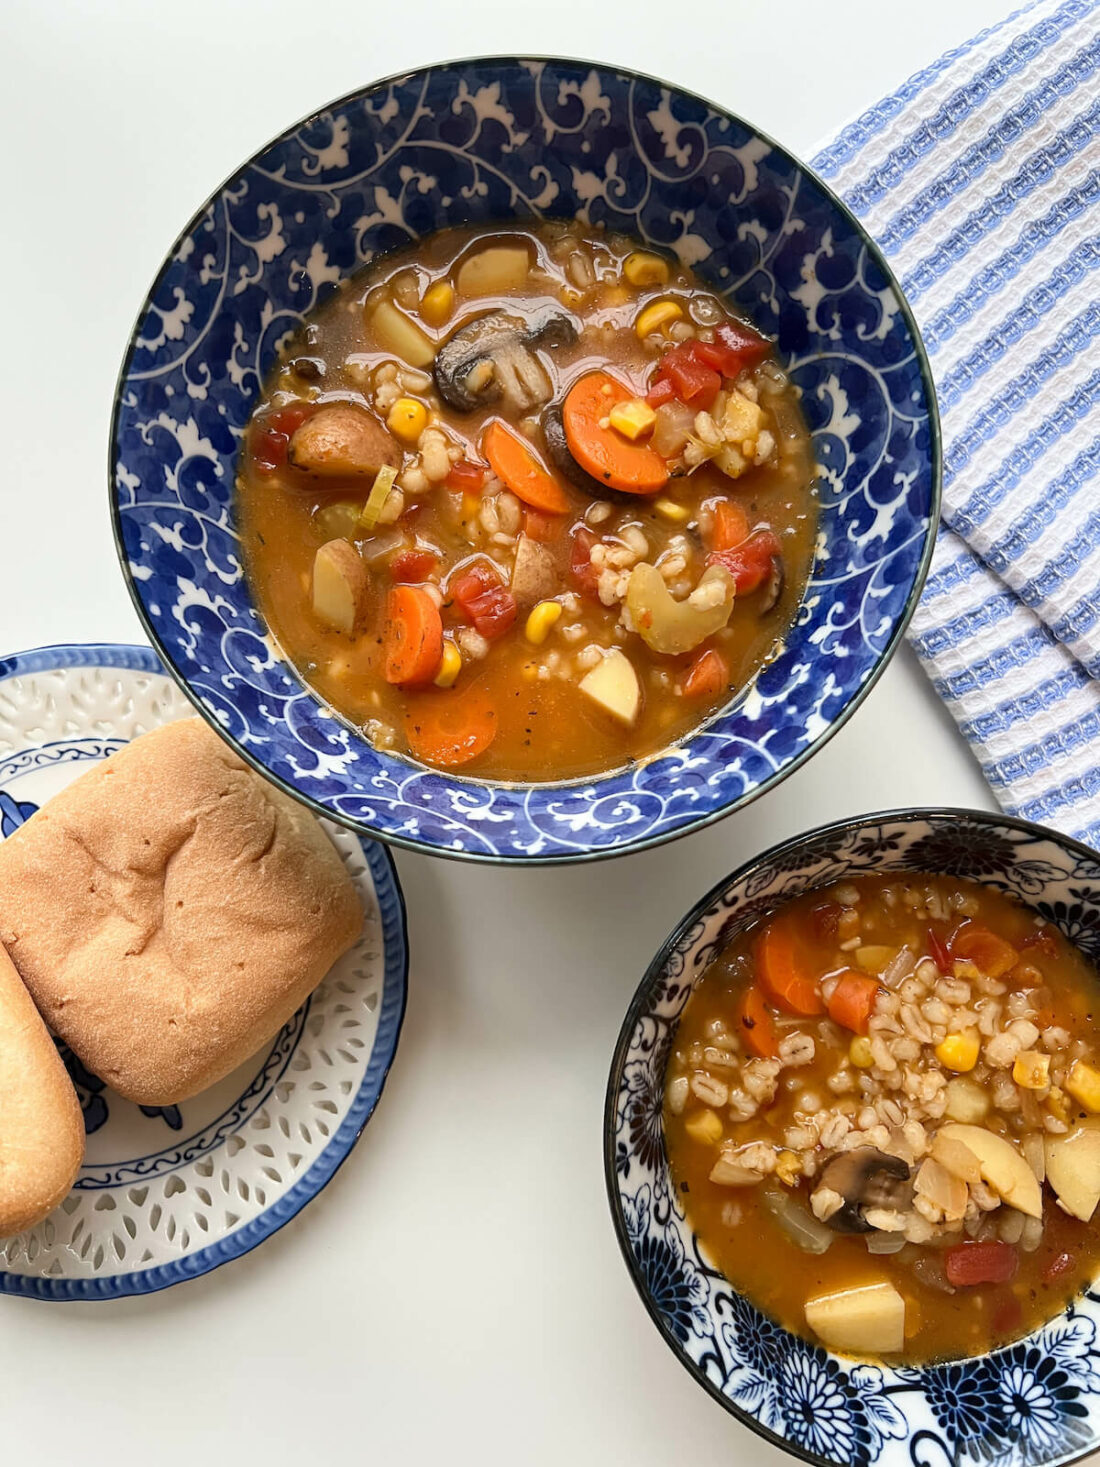 This easy vegetable barley soup will warm you up and keep full in the cold winter months.